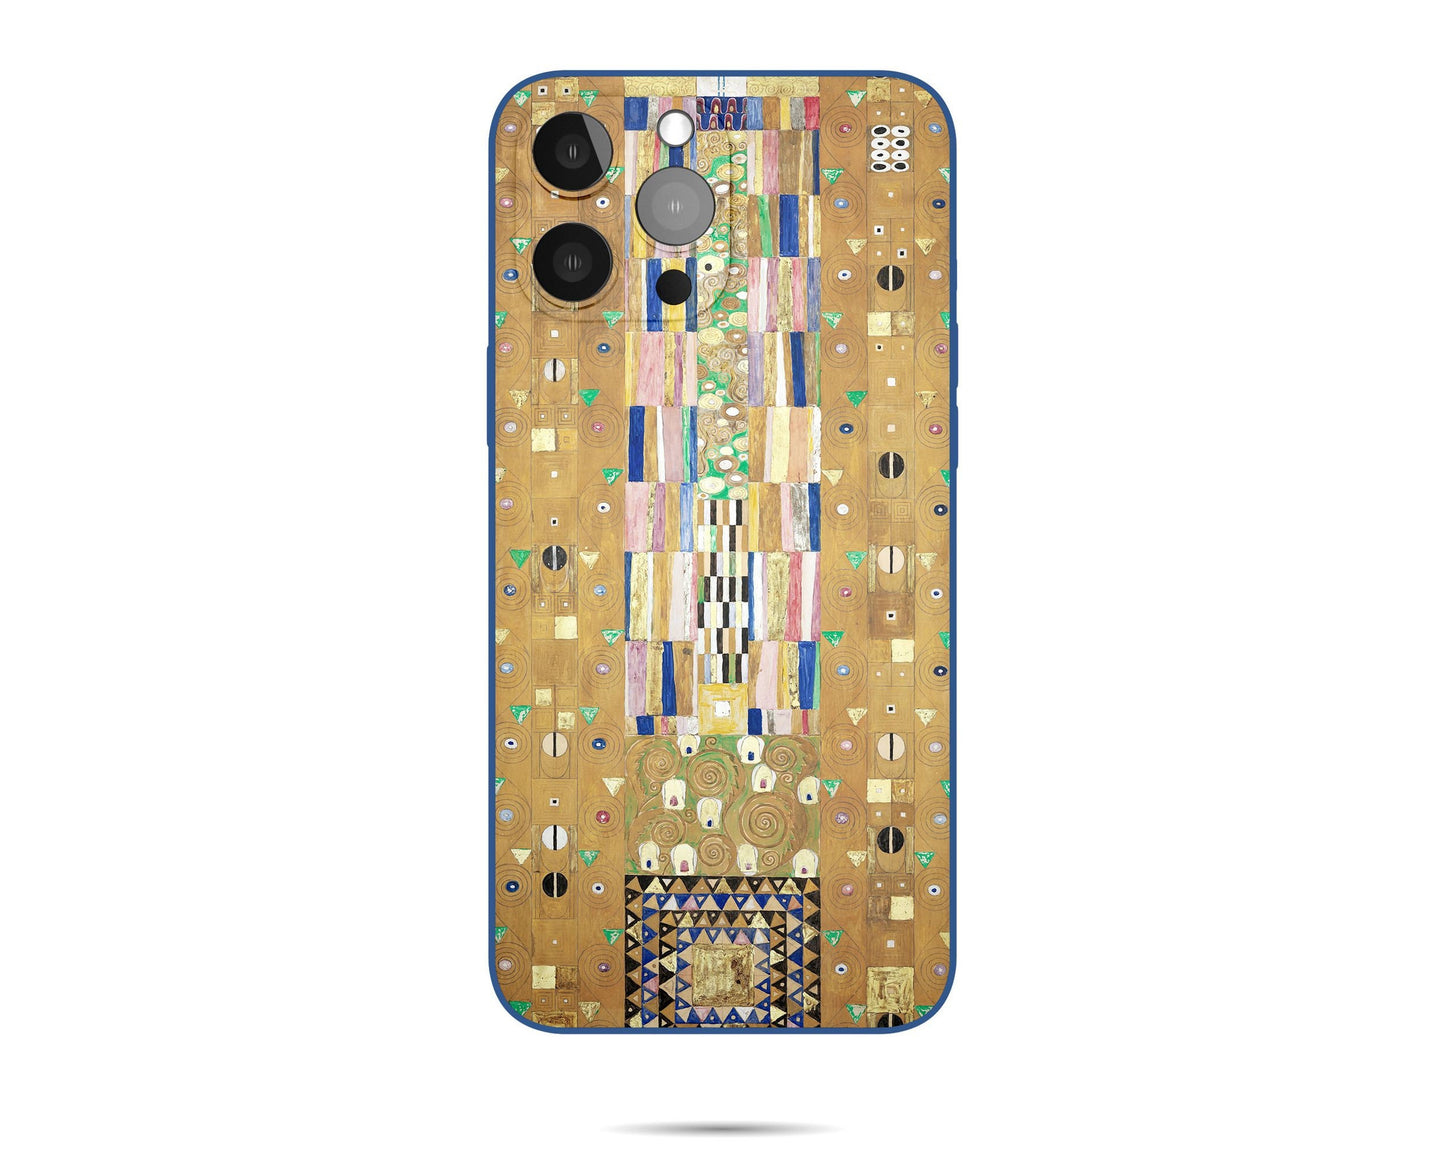 Iphone Case Of Gustav Klimt Abstract Painting Knight Iphone Cover, Iphone 12 Mini Case, Iphone Xs Max Case, Birthday Gift, Iphone Case Matte